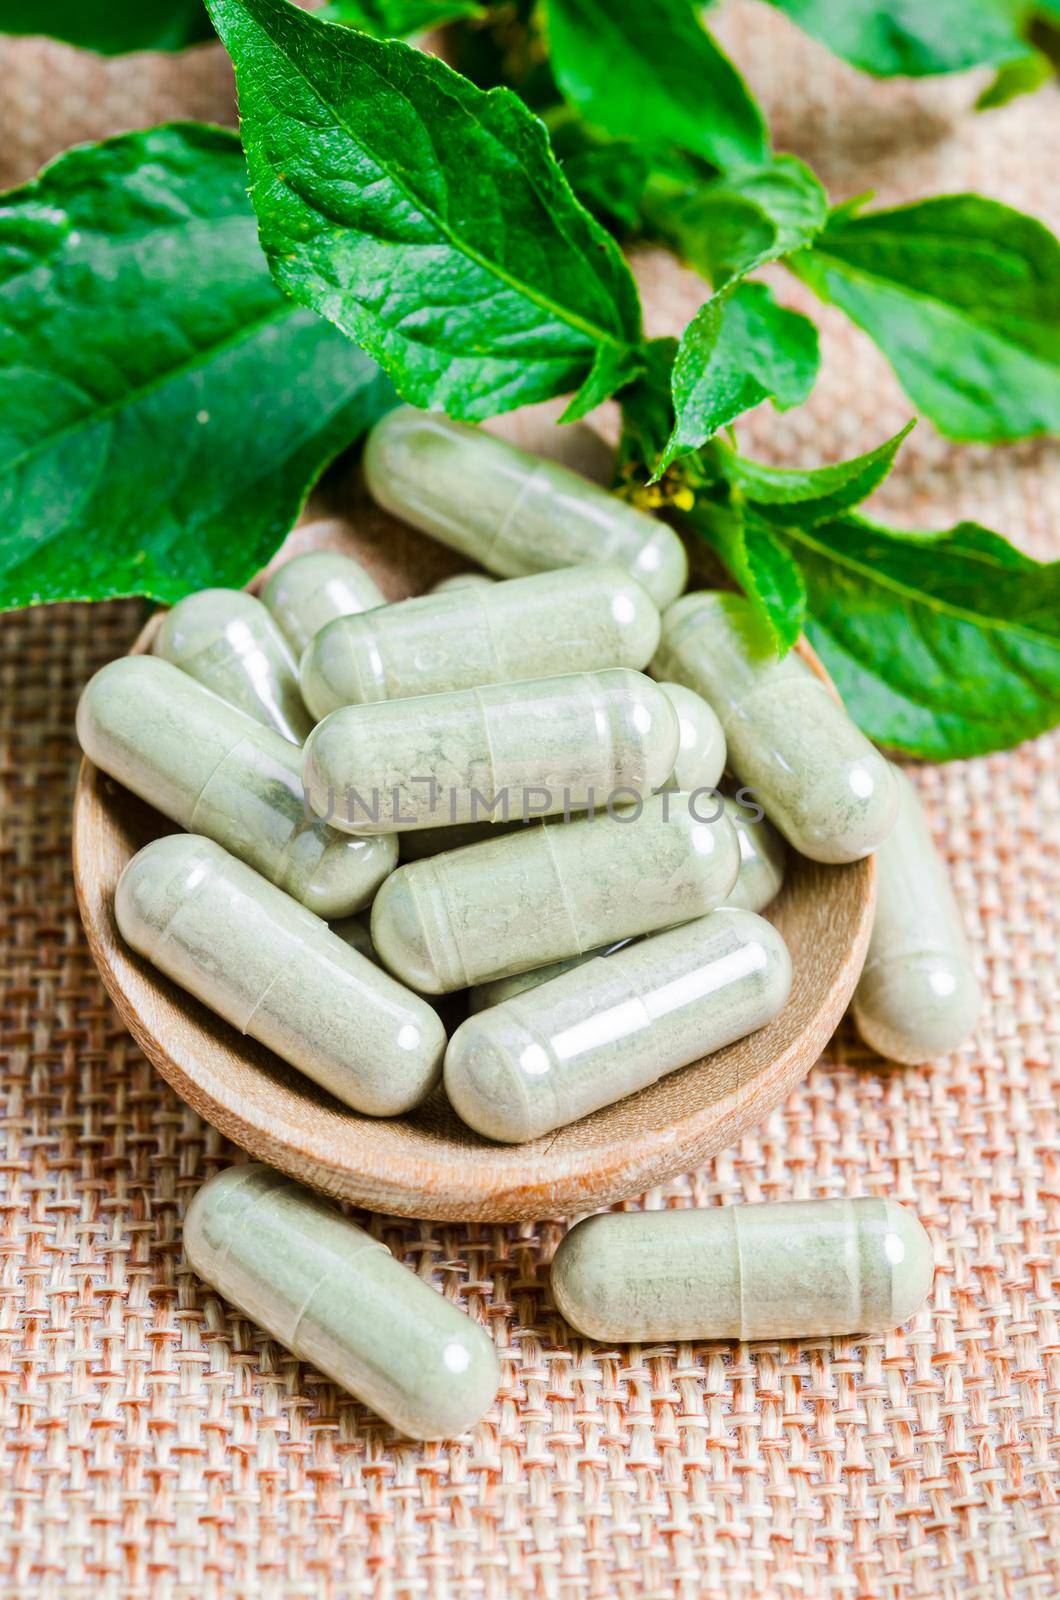 Pile of herbal medicine capsules in wooden spoon with green leaf on sack background.